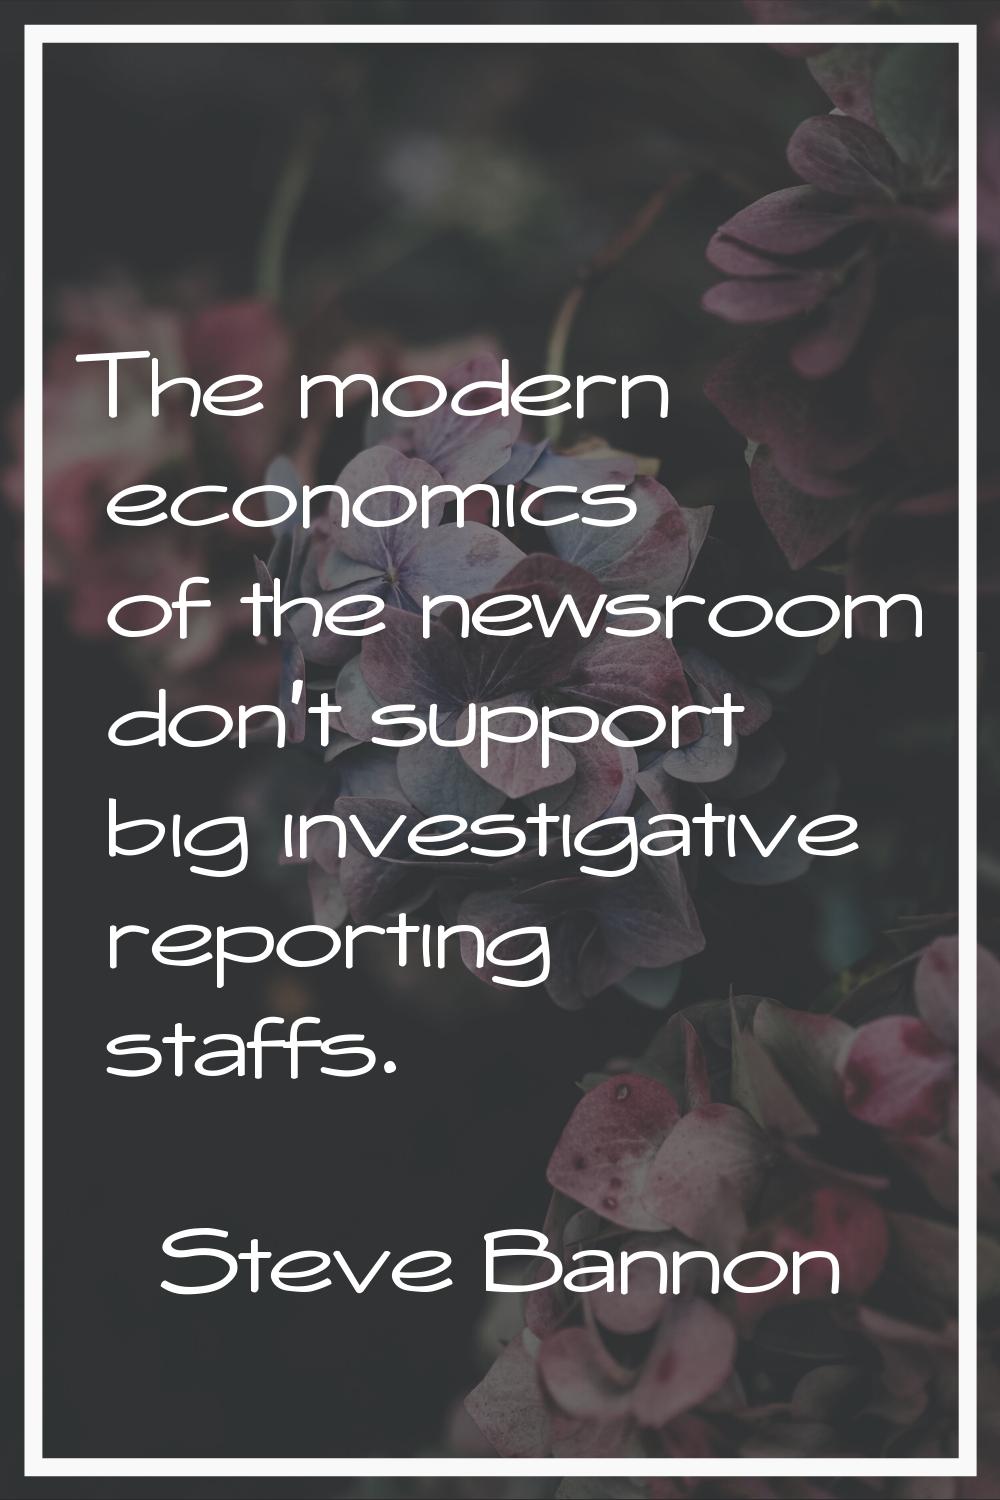 The modern economics of the newsroom don't support big investigative reporting staffs.